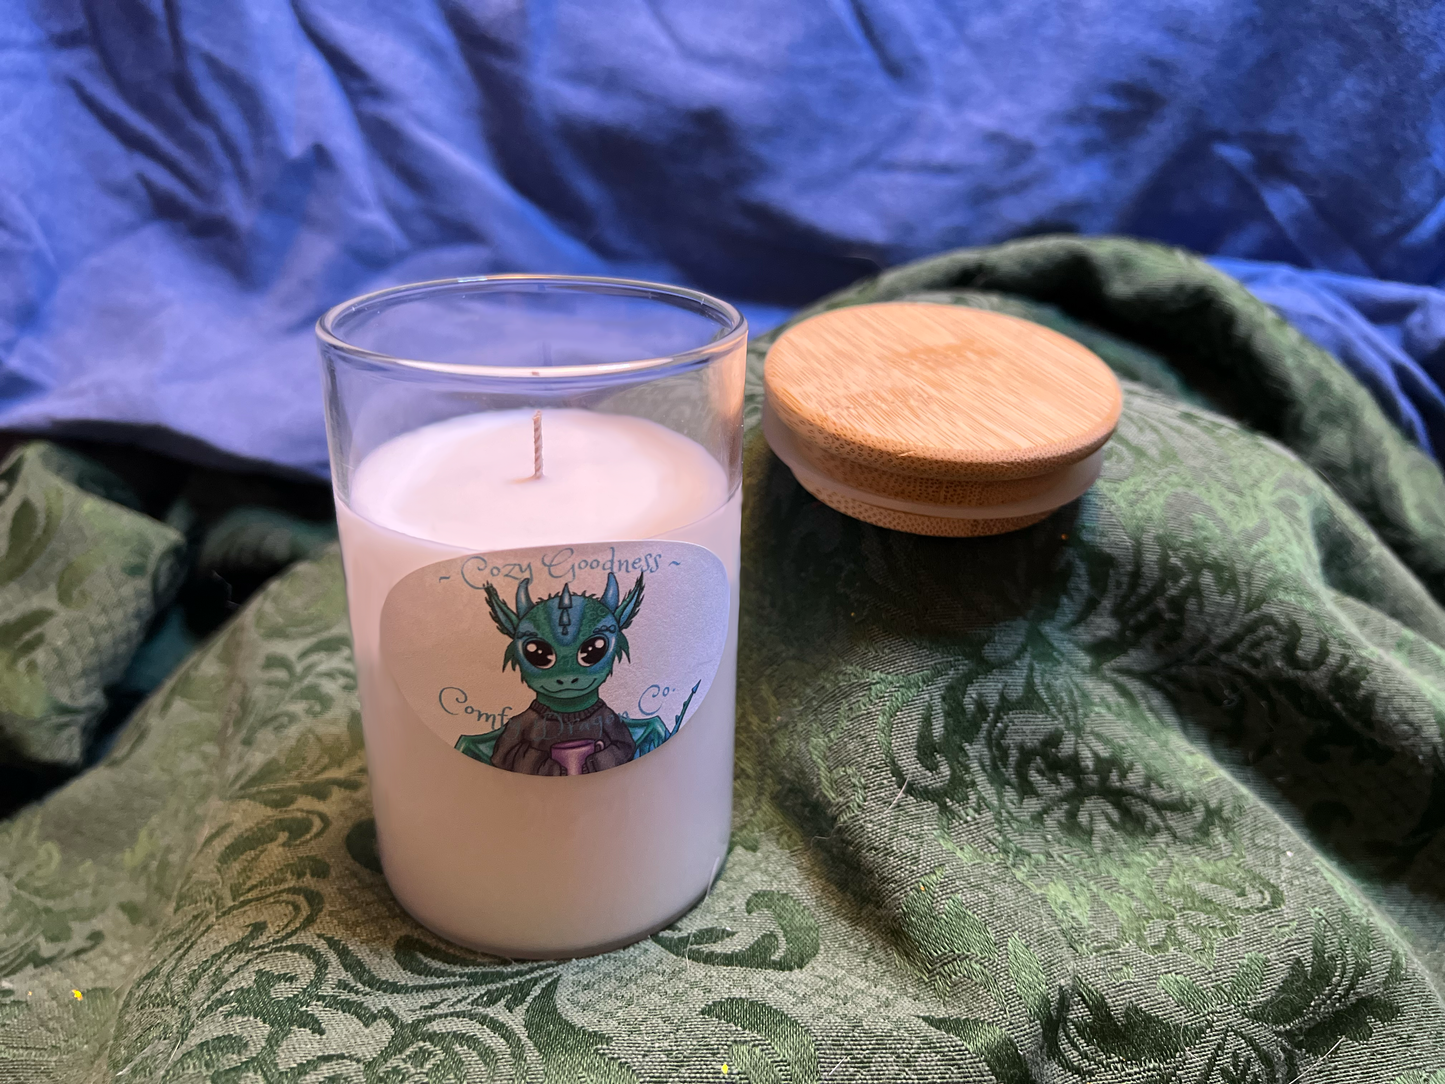 8oz Cozy Goodness Candle